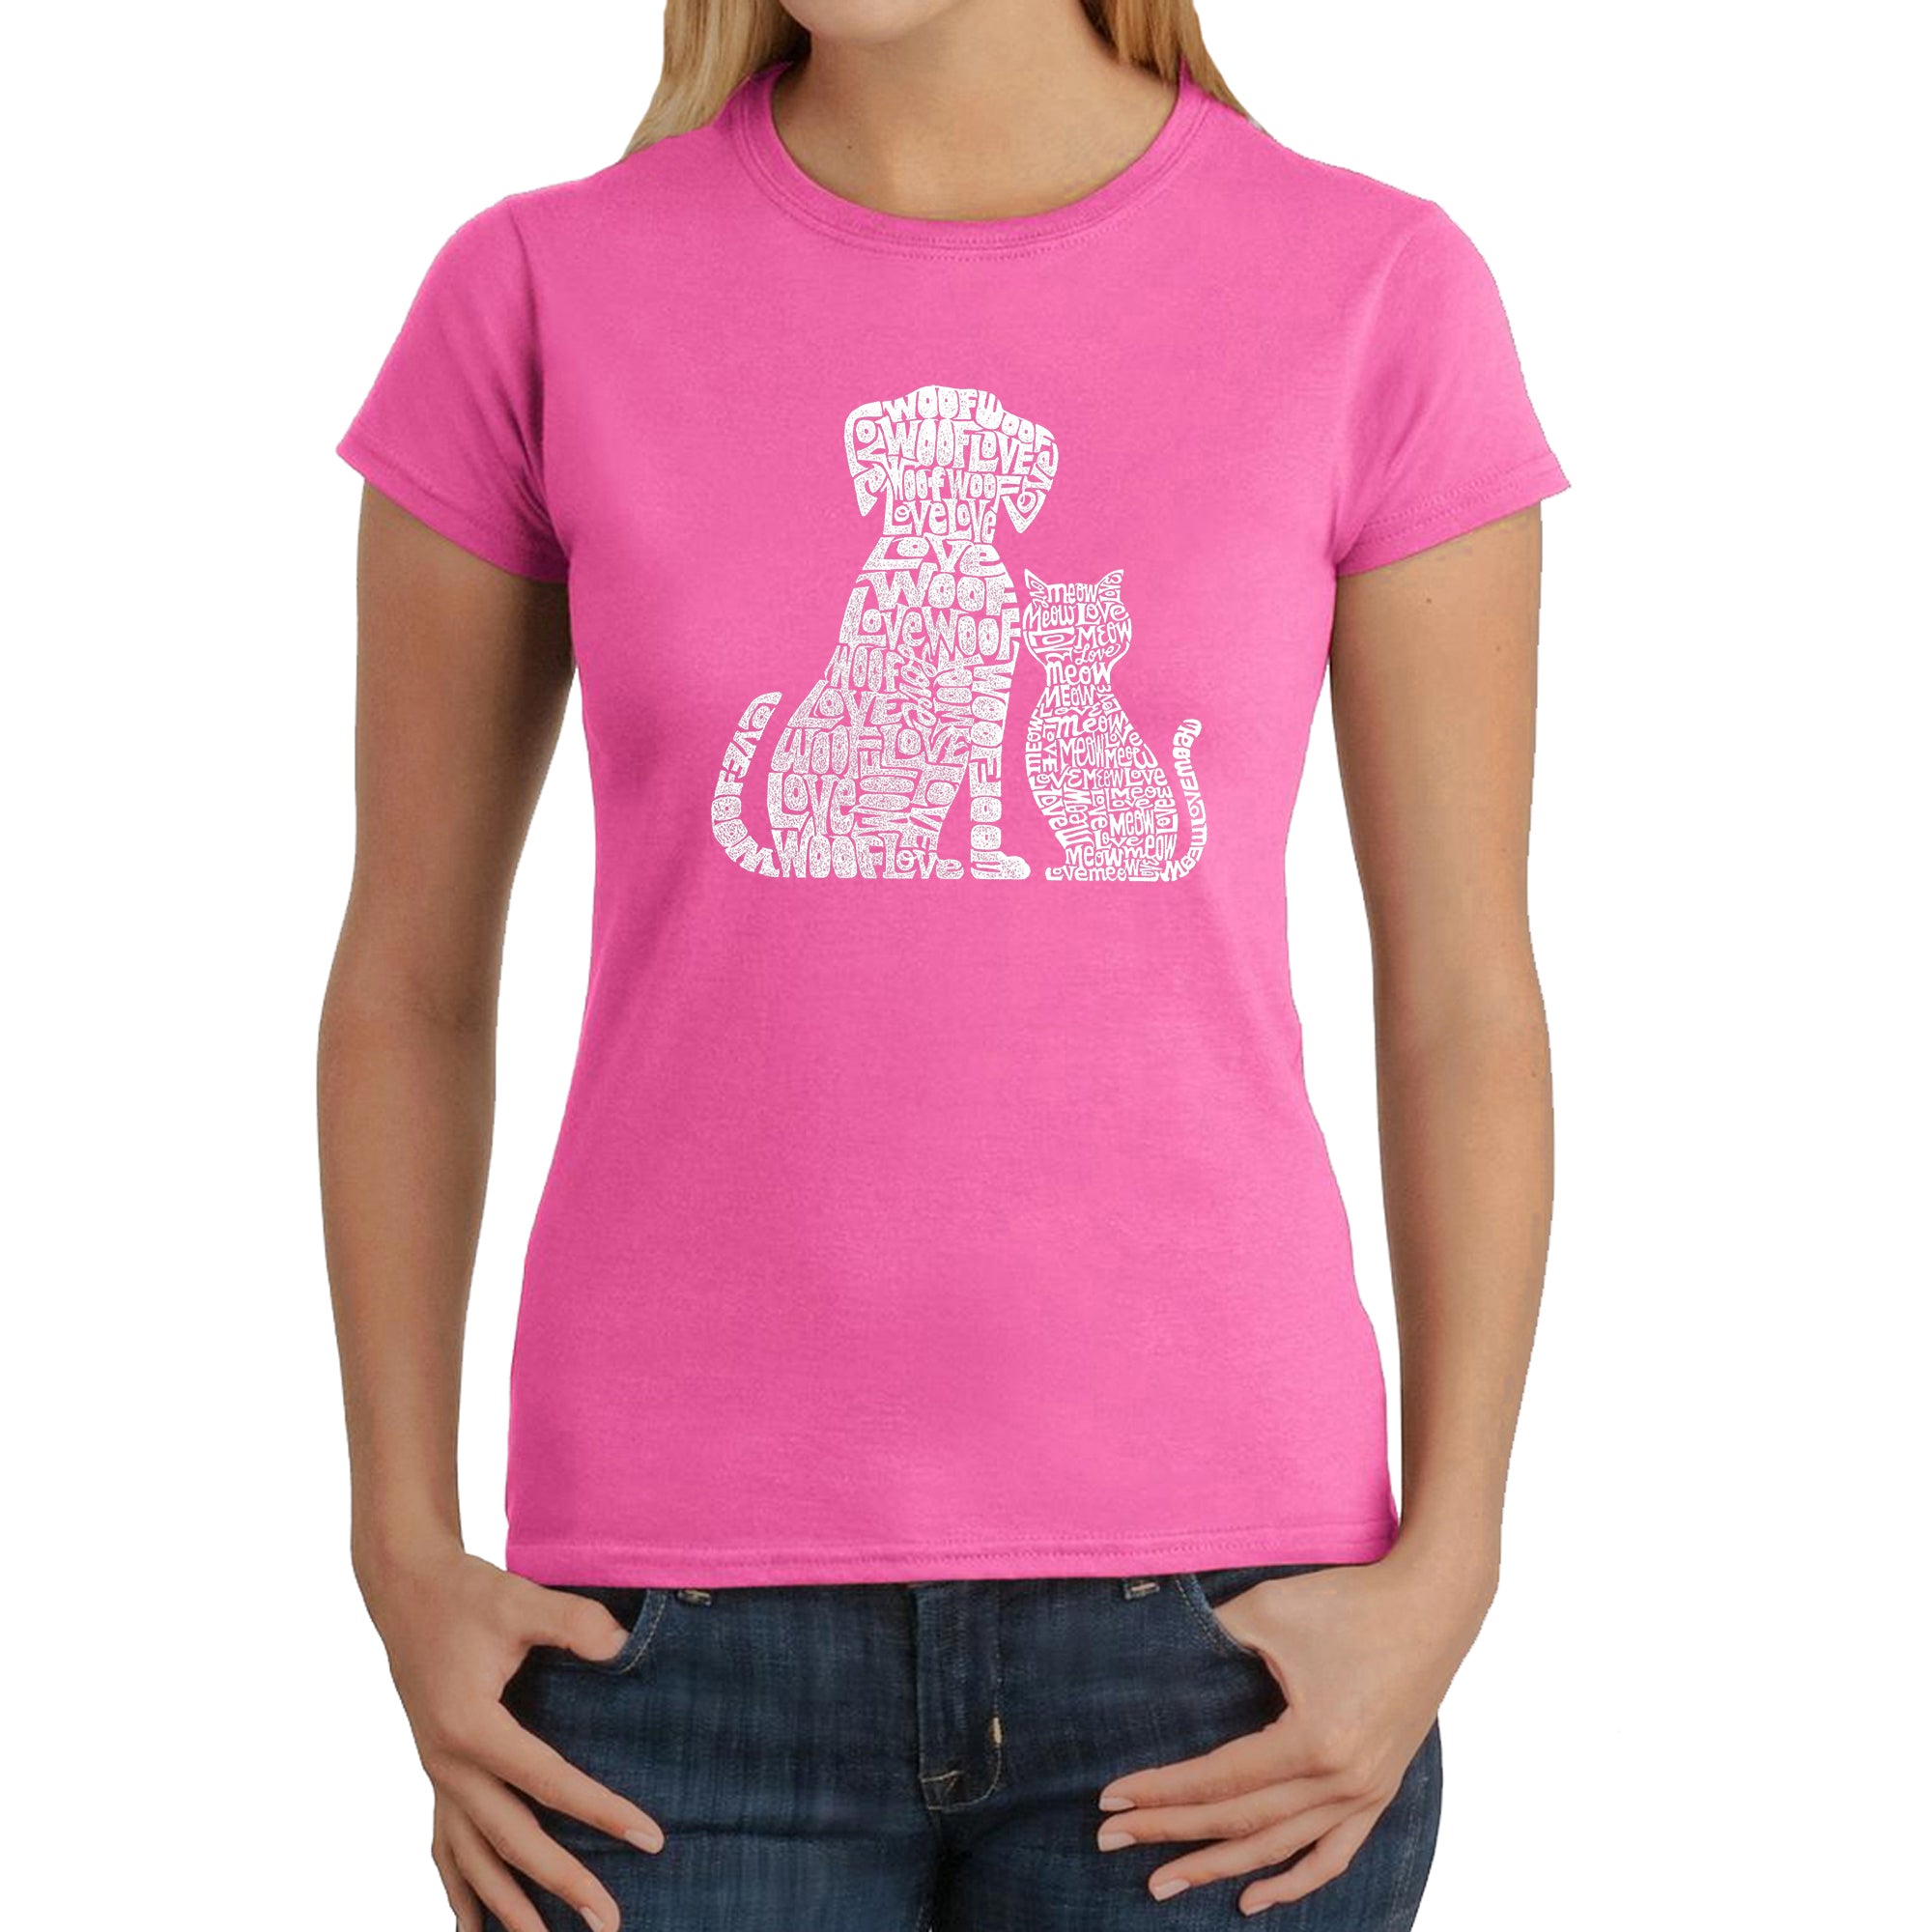 Dogs And Cats - Women's Word Art T-Shirt - Pink - XX-Large